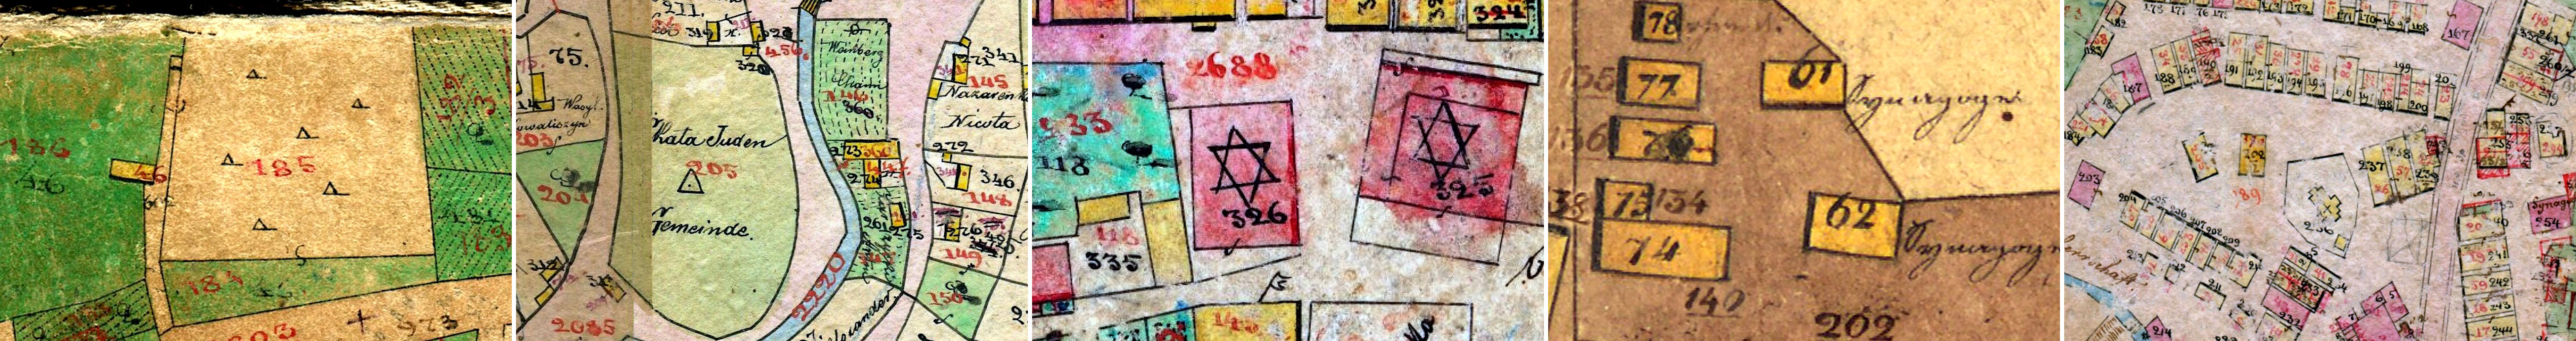 Jewish community property on cadastral indication sketches